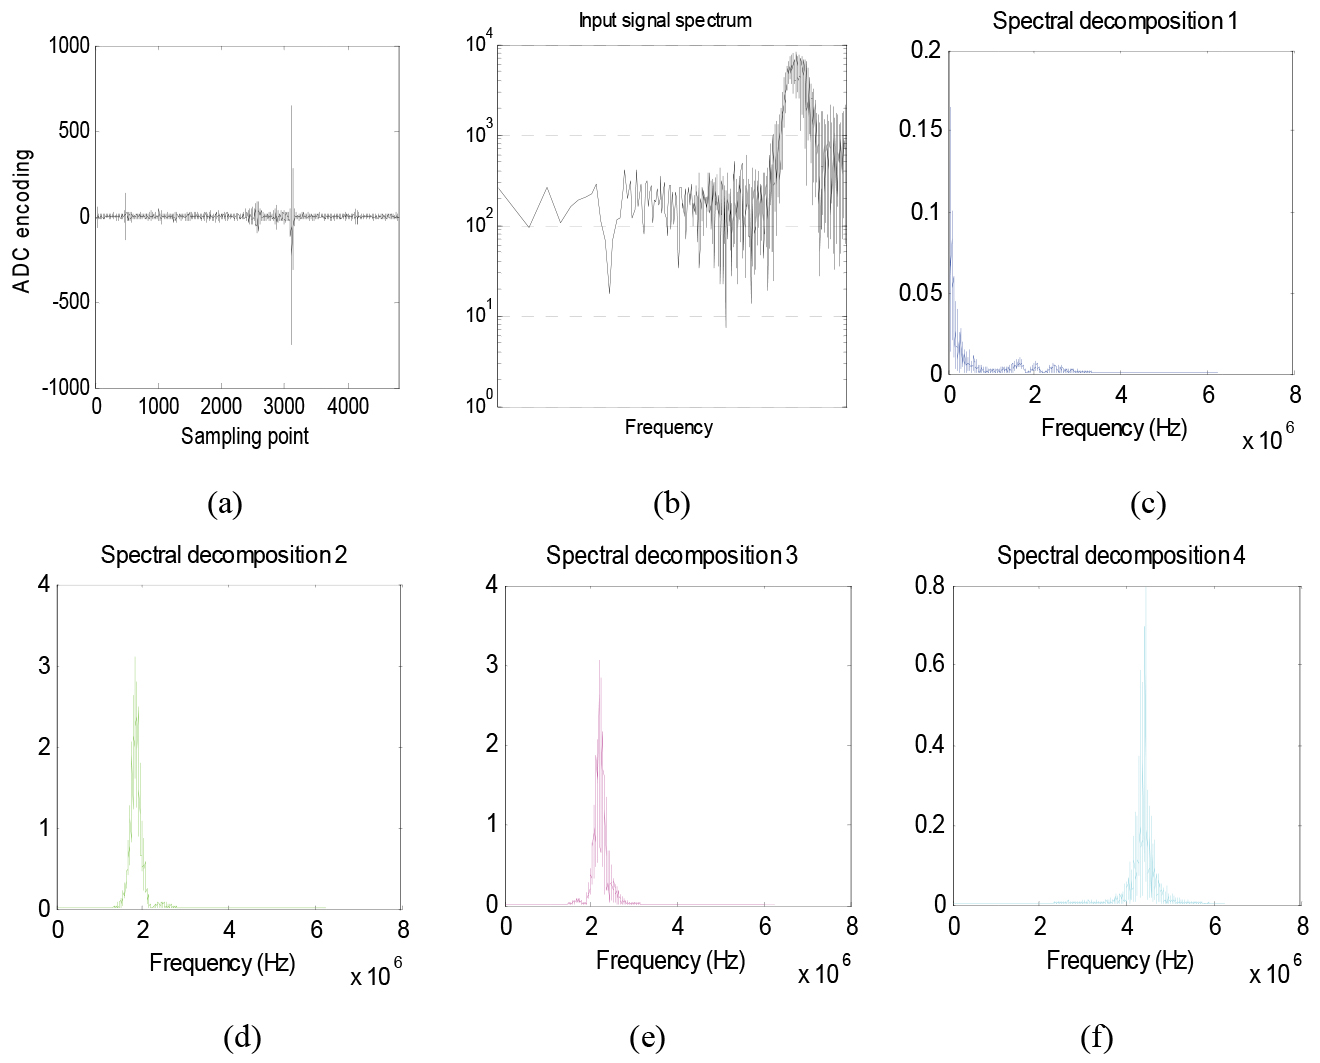 The spectral analyzing for one channel data. (a) original signal; (b) spectrum of (a); (c) spectrum of mode 1; (d) spectrum of mode 2; (e) spectrum of mode 3; (f) spectrum of mode 4.